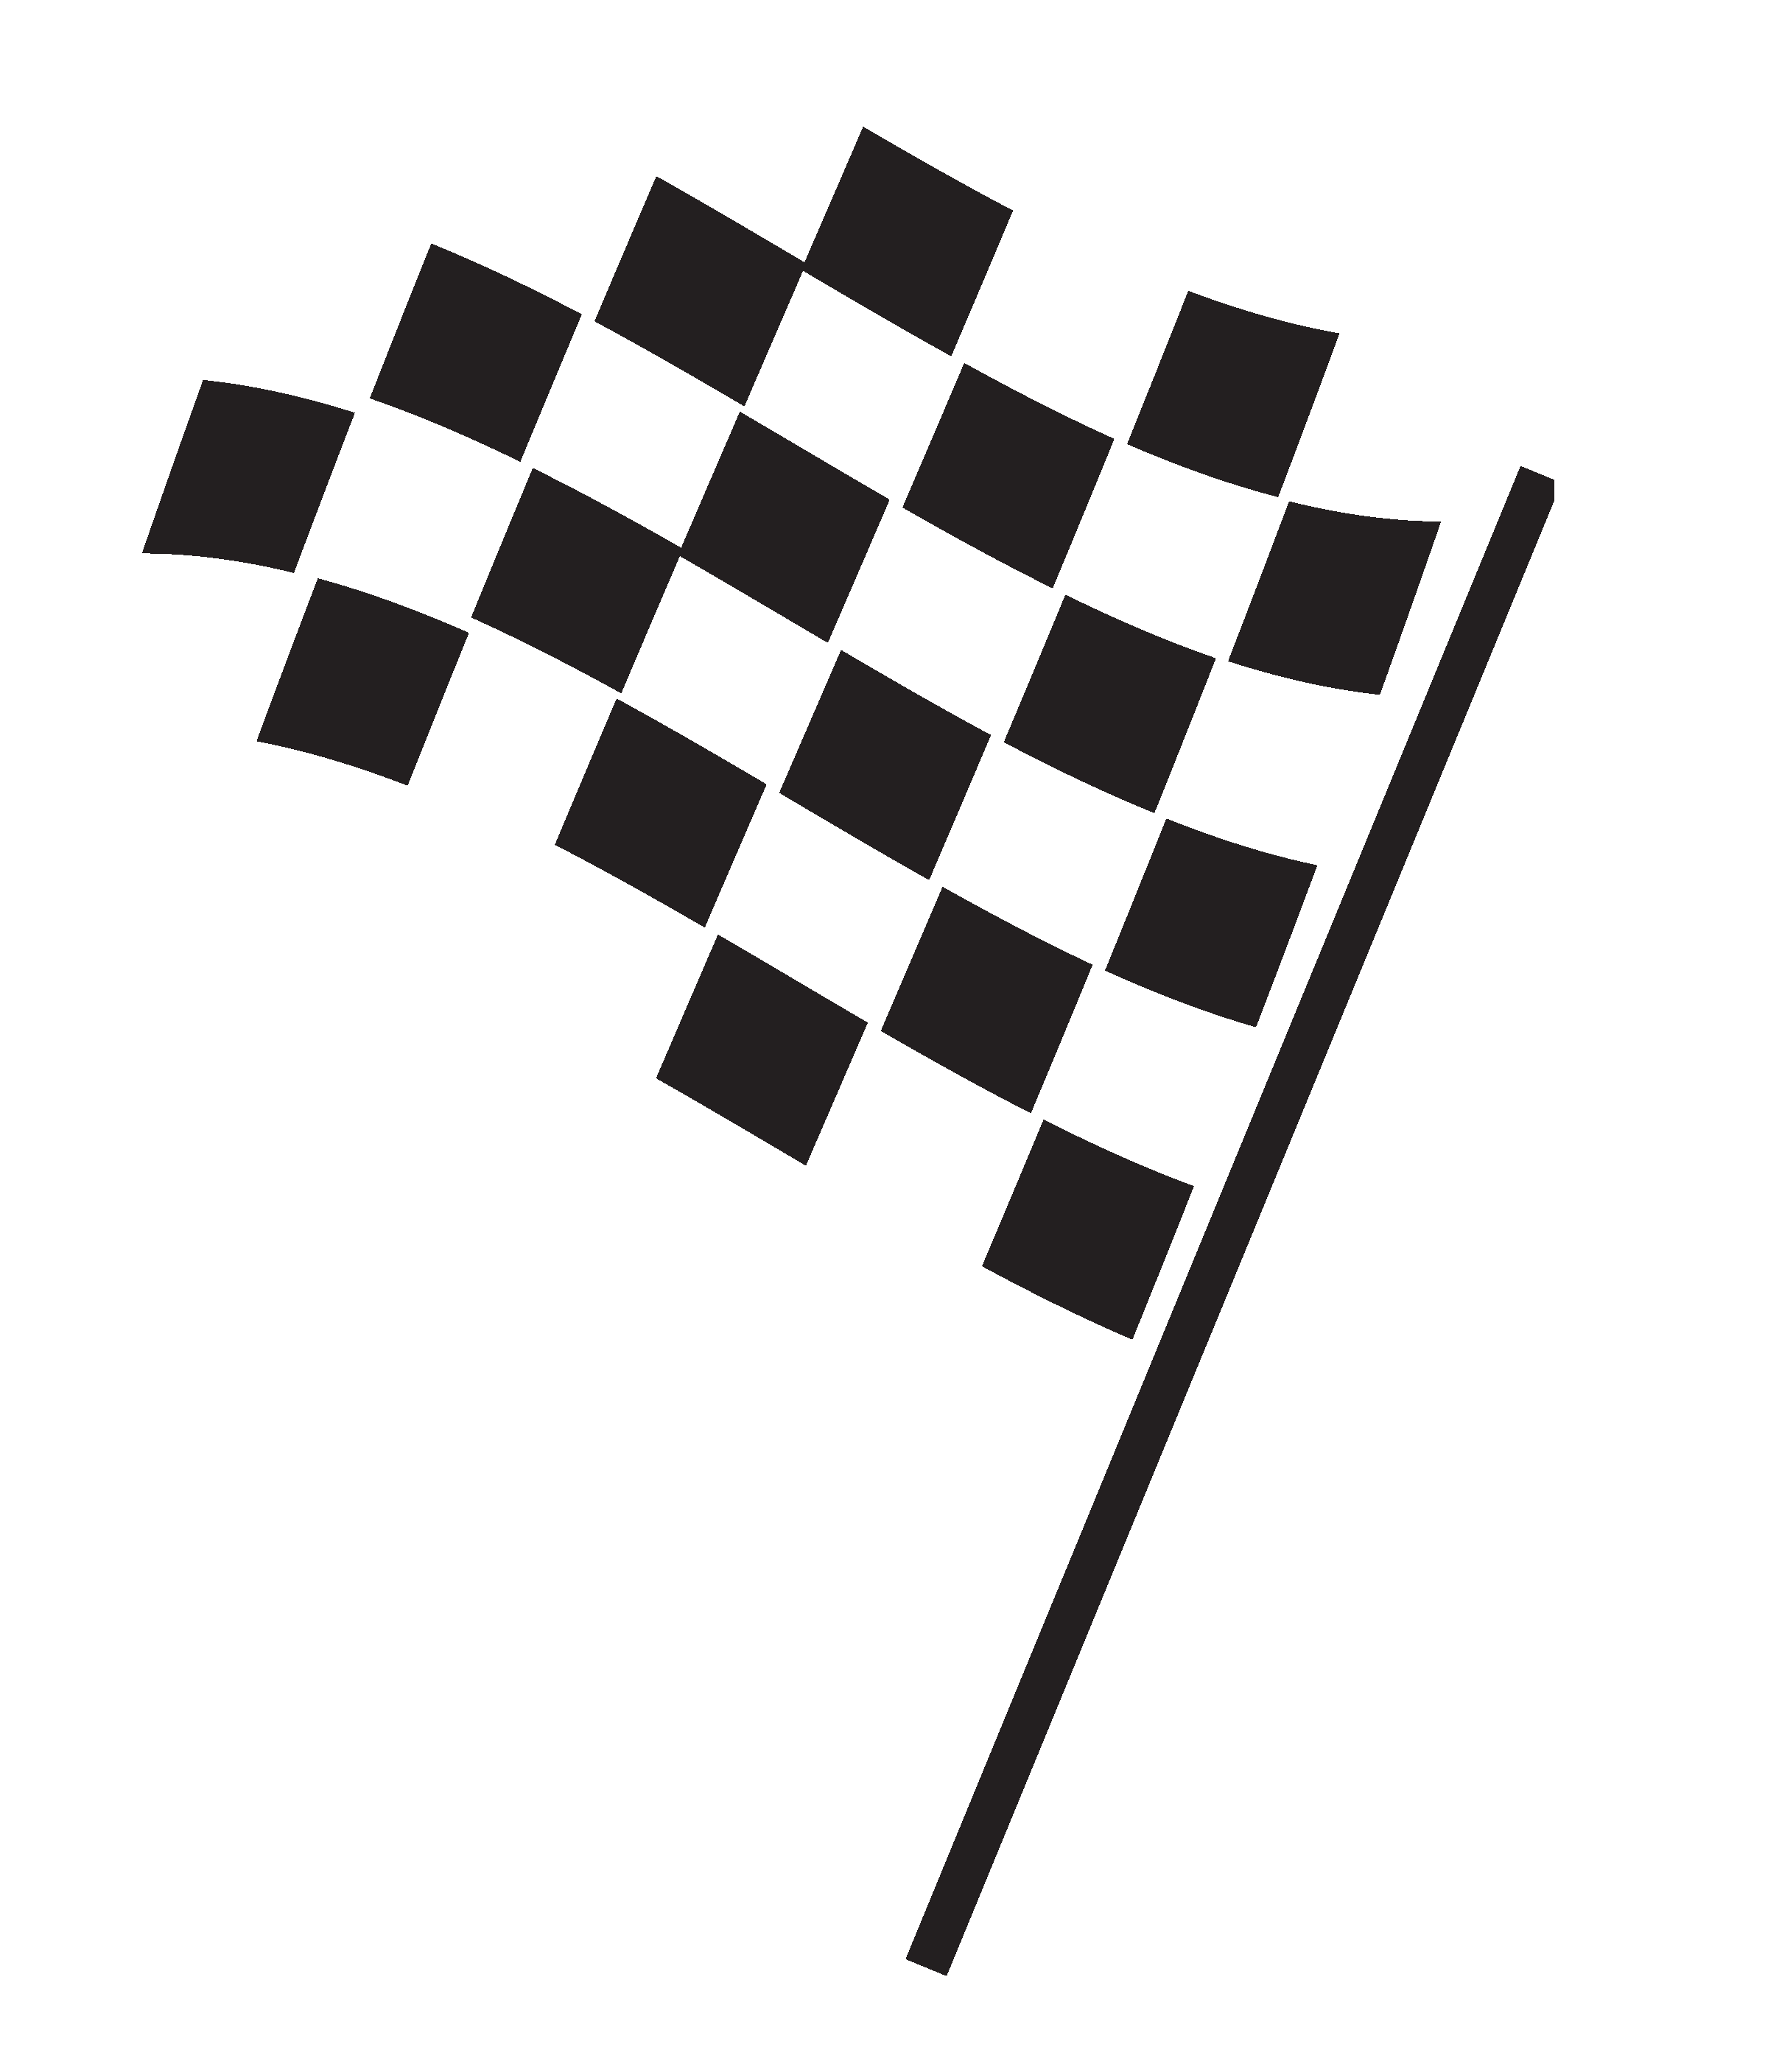 Image Checkered Flag Free Icon PNG Transparent Background, Free Download  #26917 - FreeIconsPNG